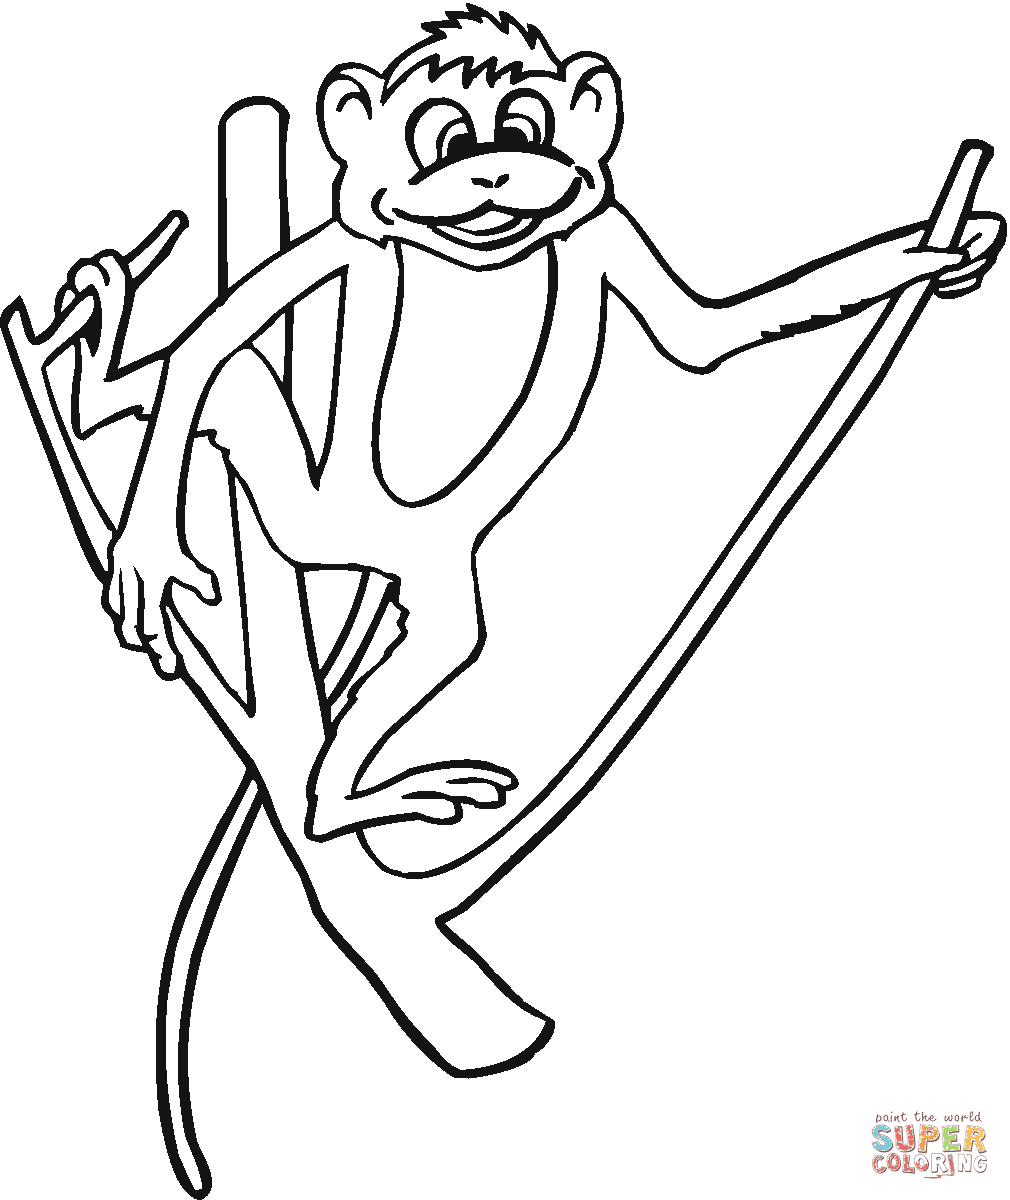 Monkey Holds The Branch Coloring Page